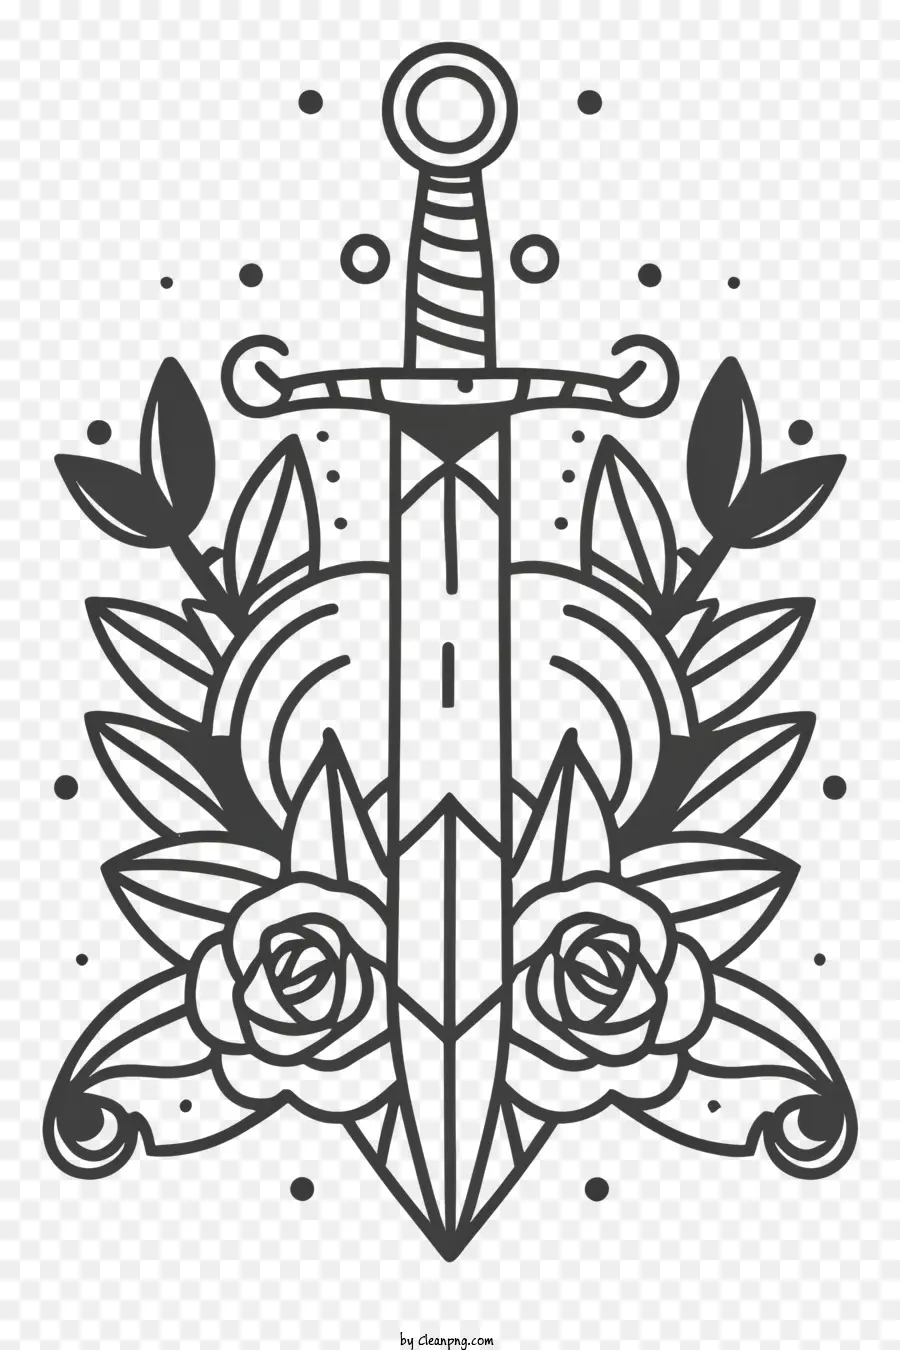 sword tattoo design black and white tattoo symbol of power symbol of protection warriors and knights